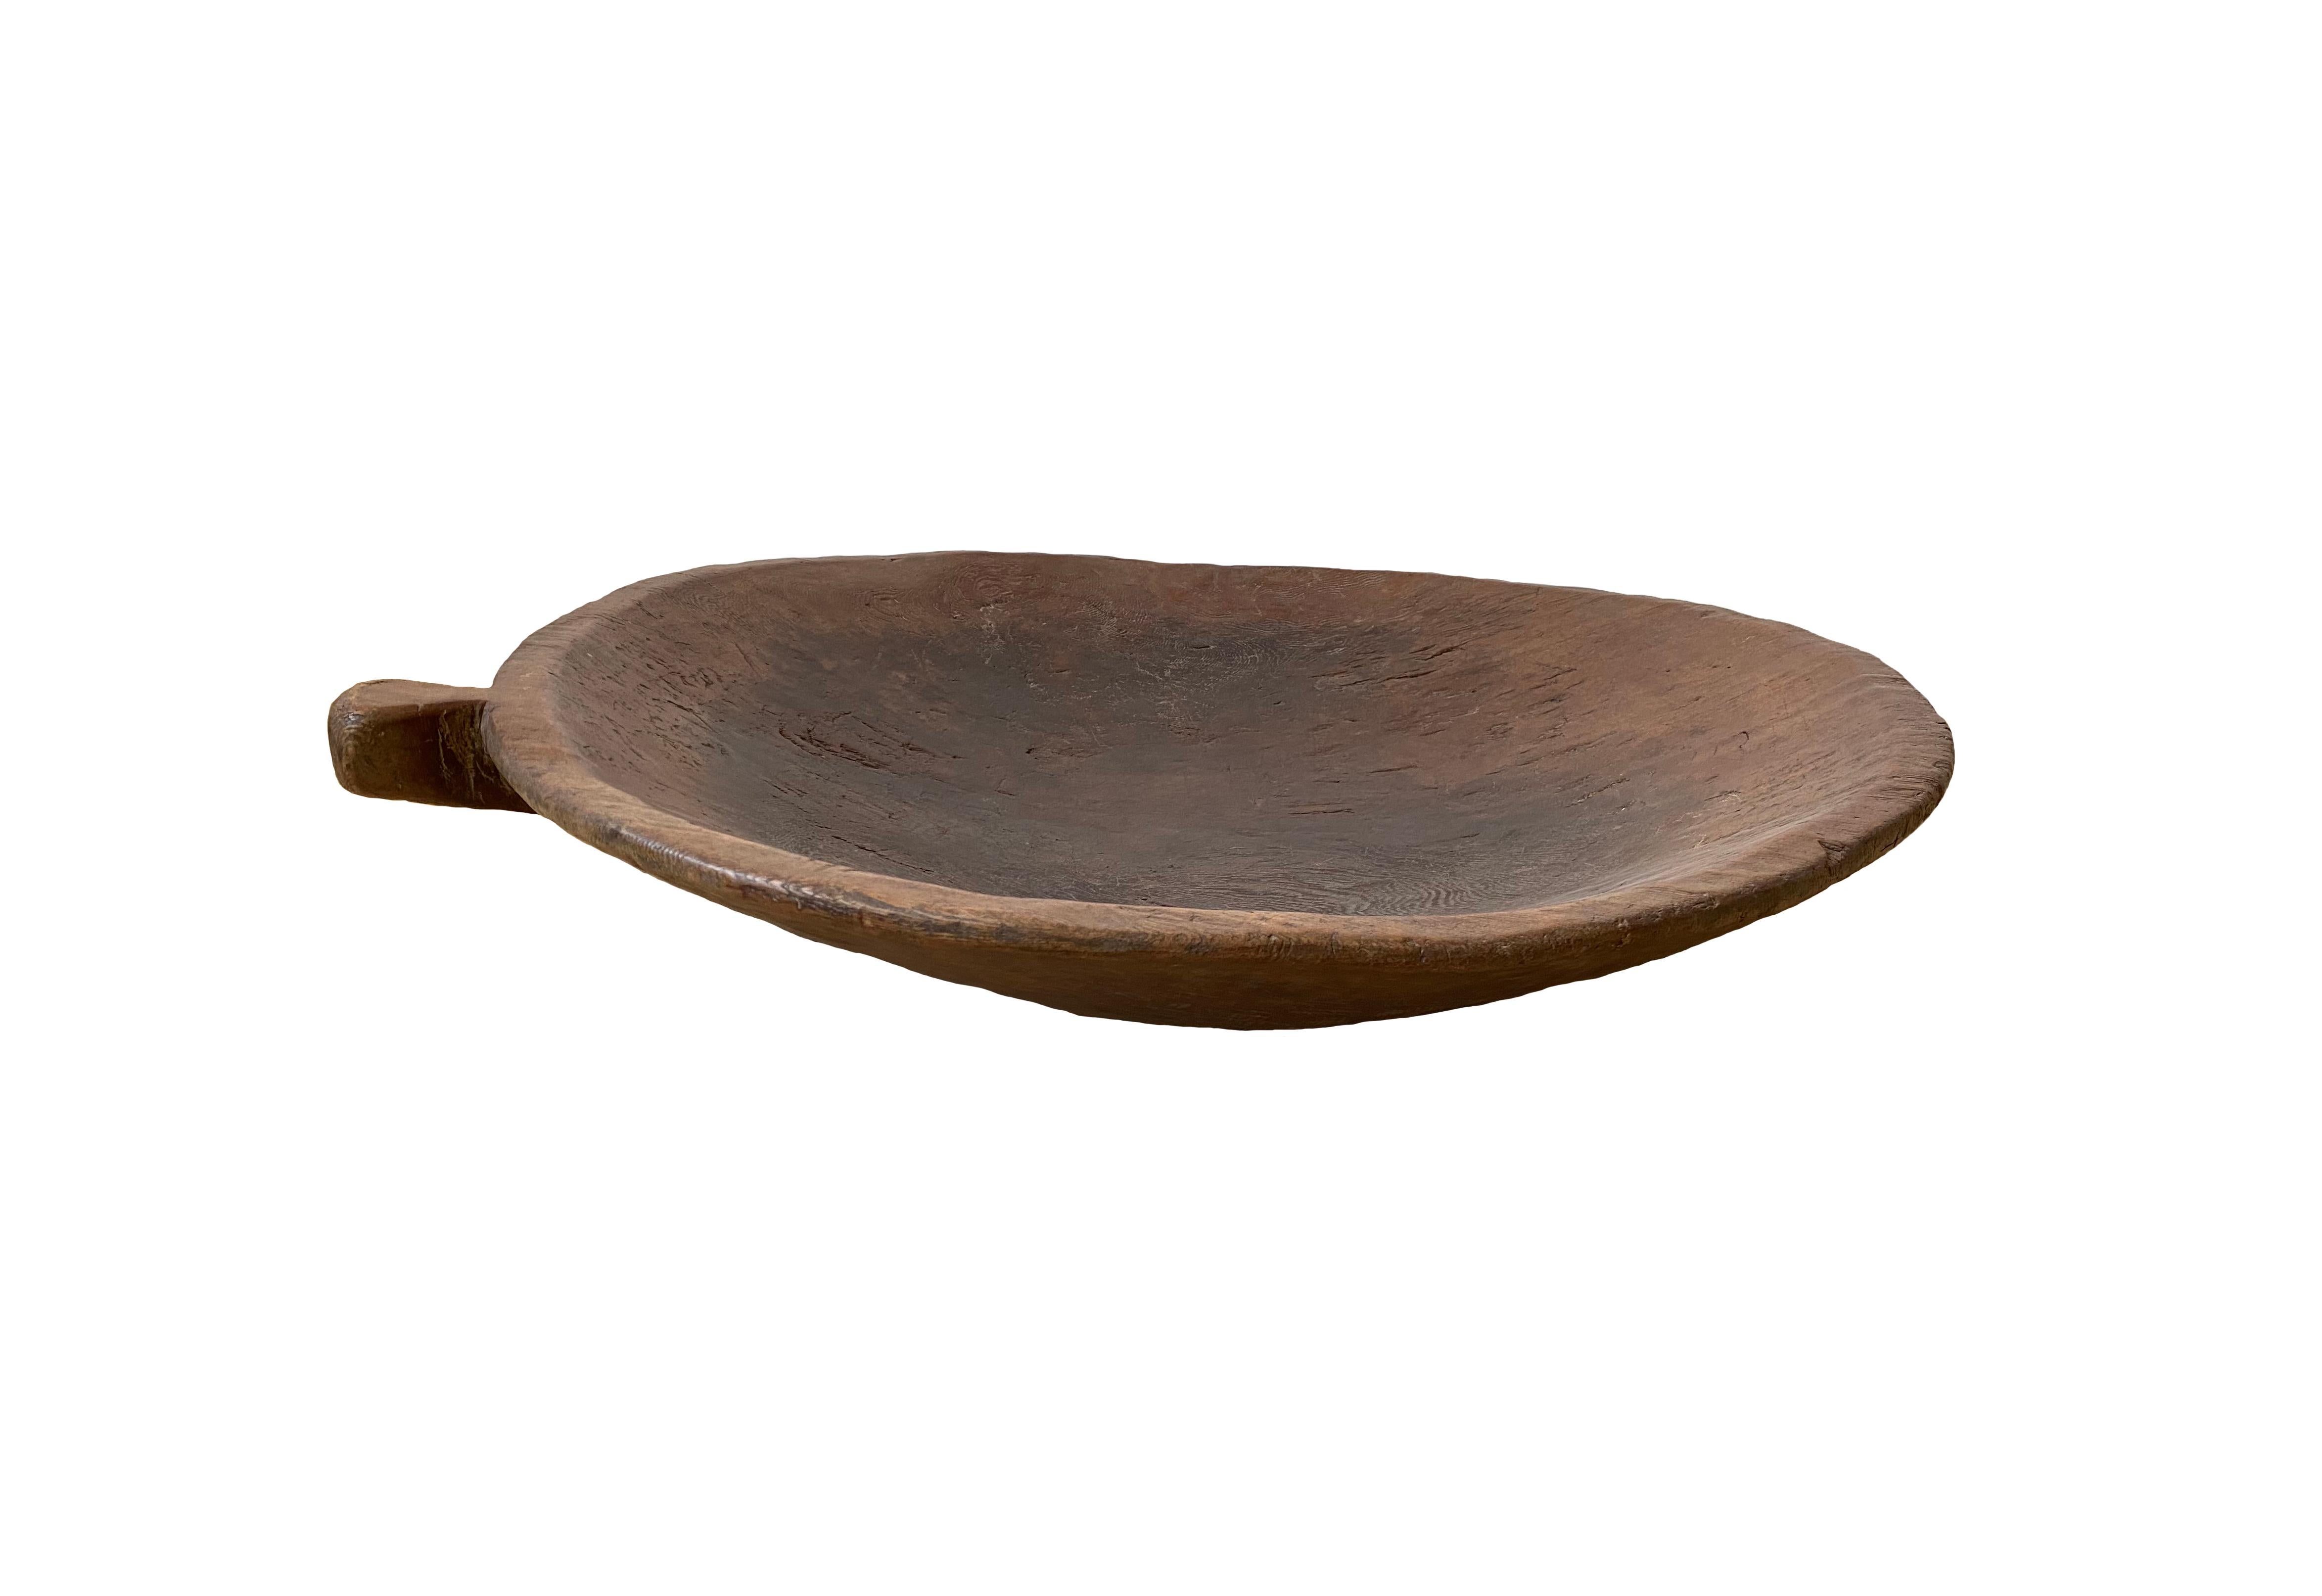 A fruitwood hand-crafted bowl from Timor Island, Indonesia from the early 20th century. The bowl was cut from a much larger slab of fruitwood. Despite its large size the bowl is relatively light and robust with a firm structure.

Dimensions: